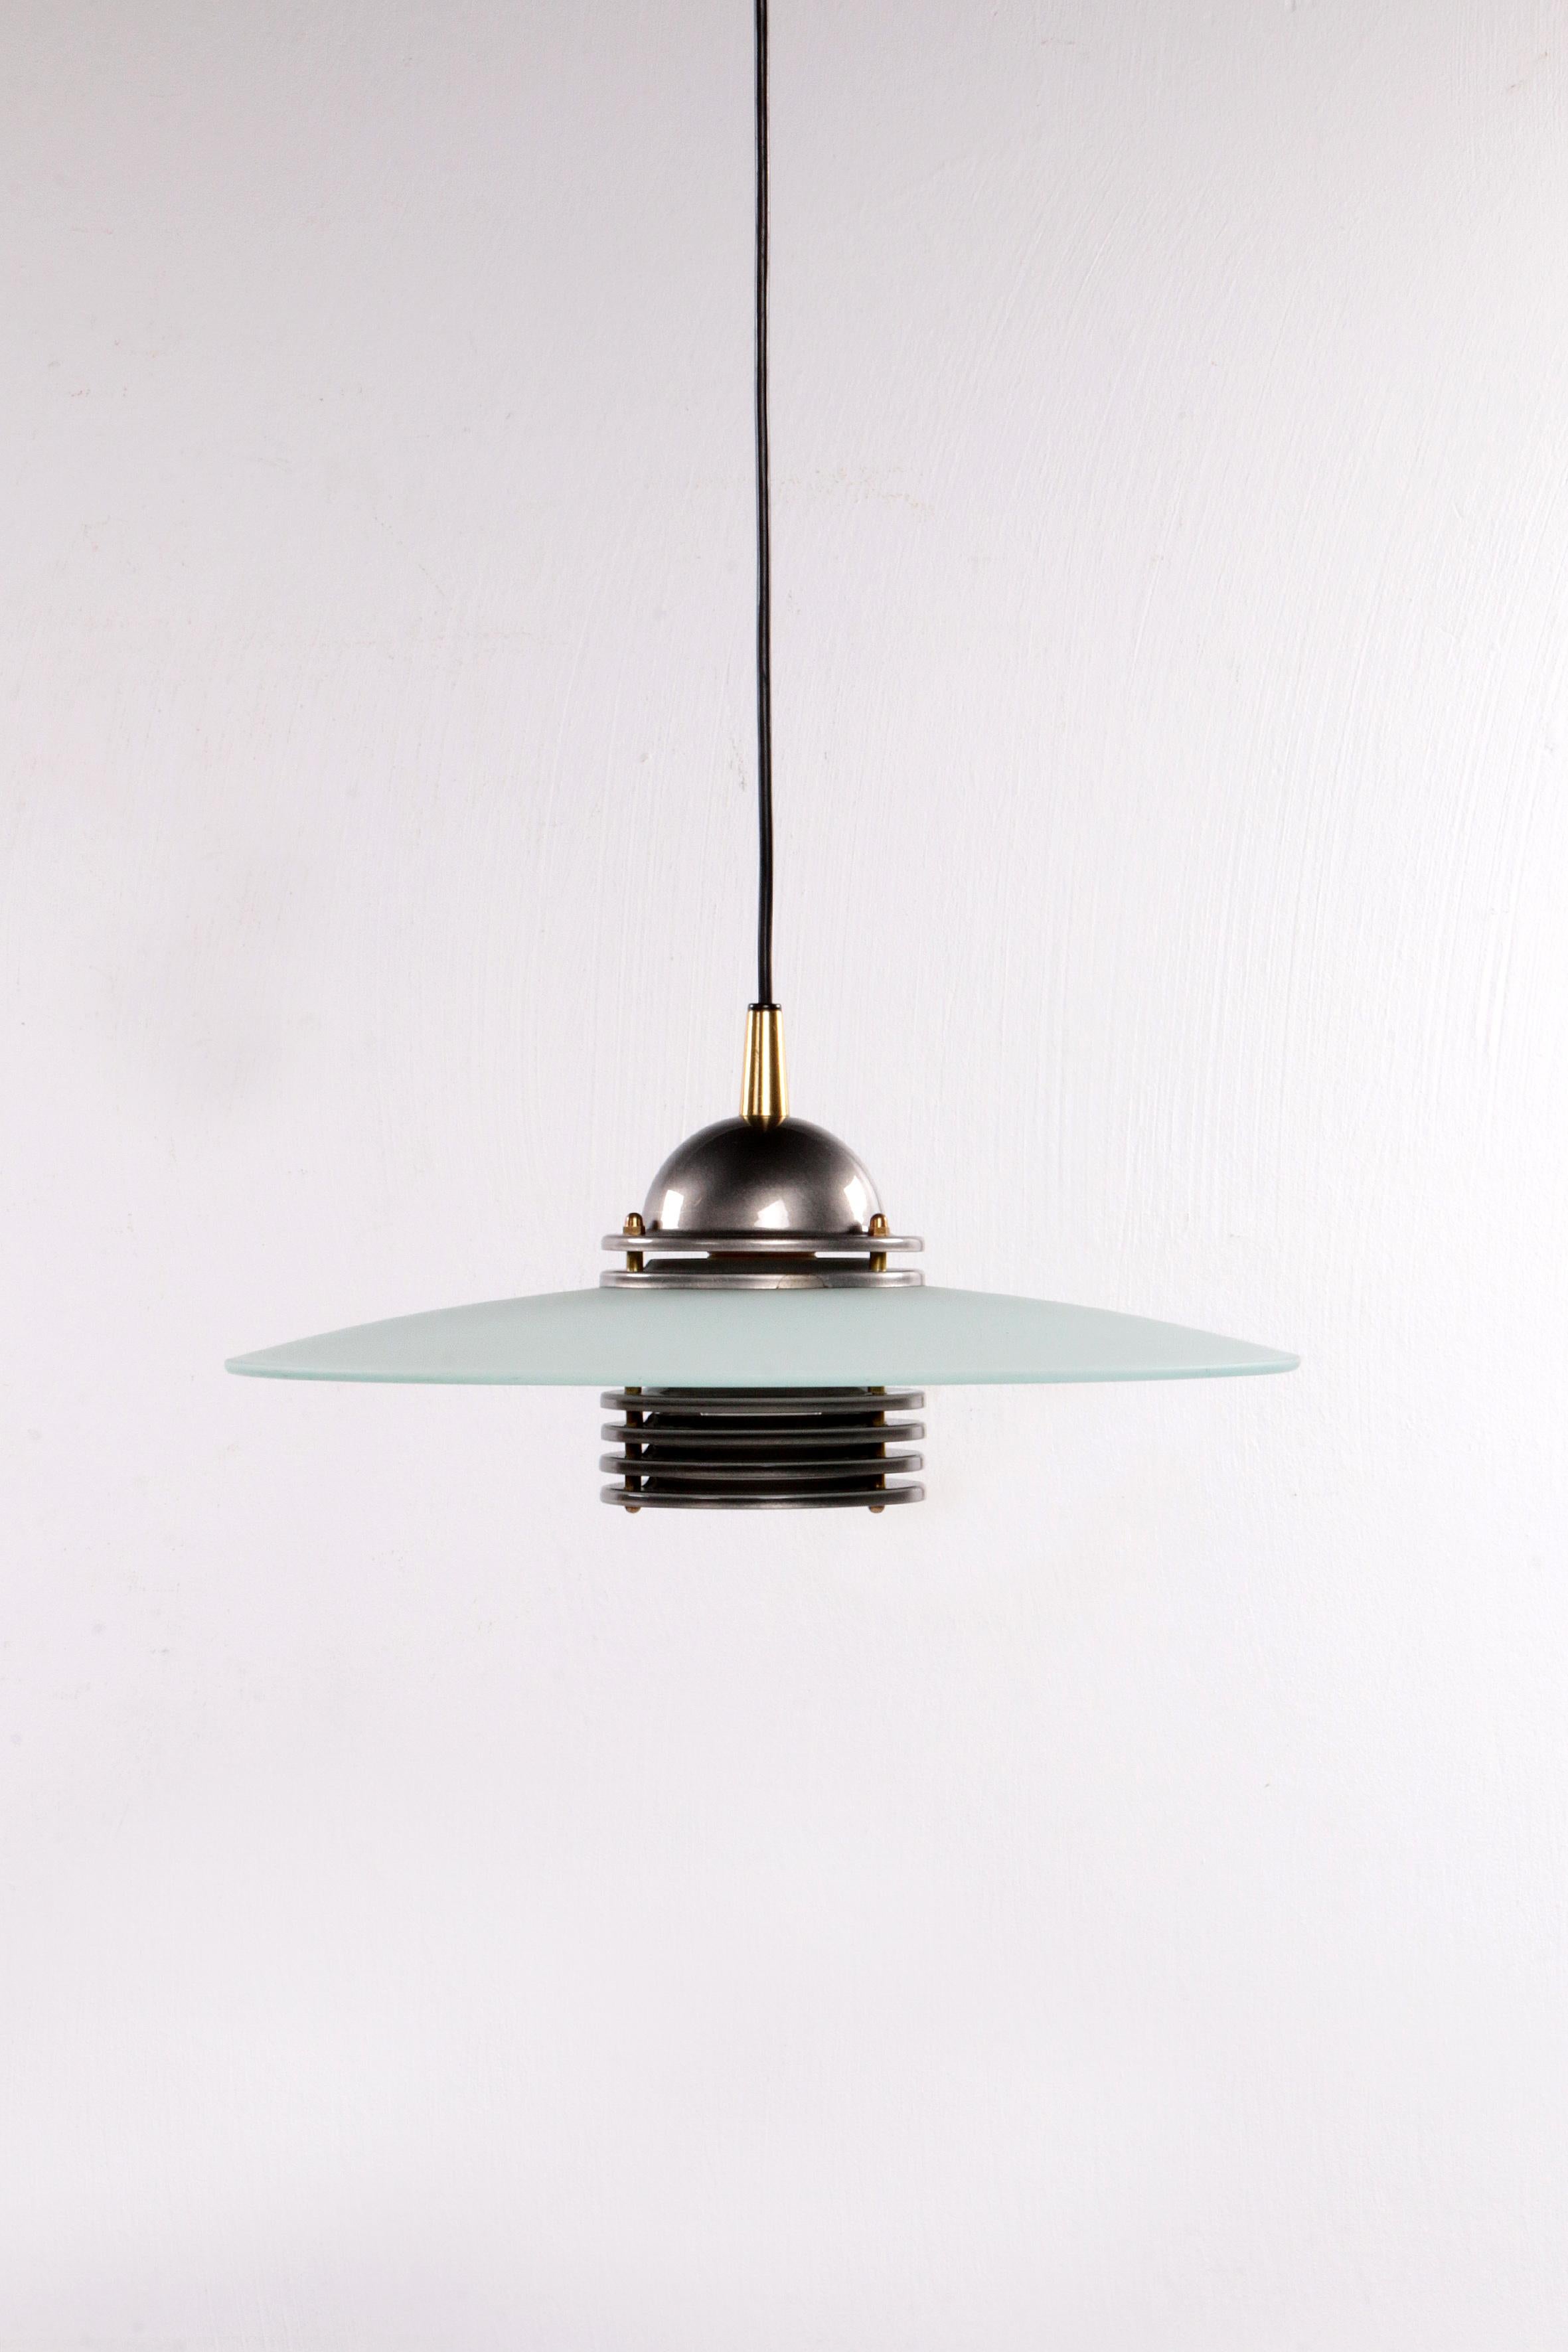 20th Century Swedish Design Pendant Lamp by The Brand Belid, 1960 For Sale